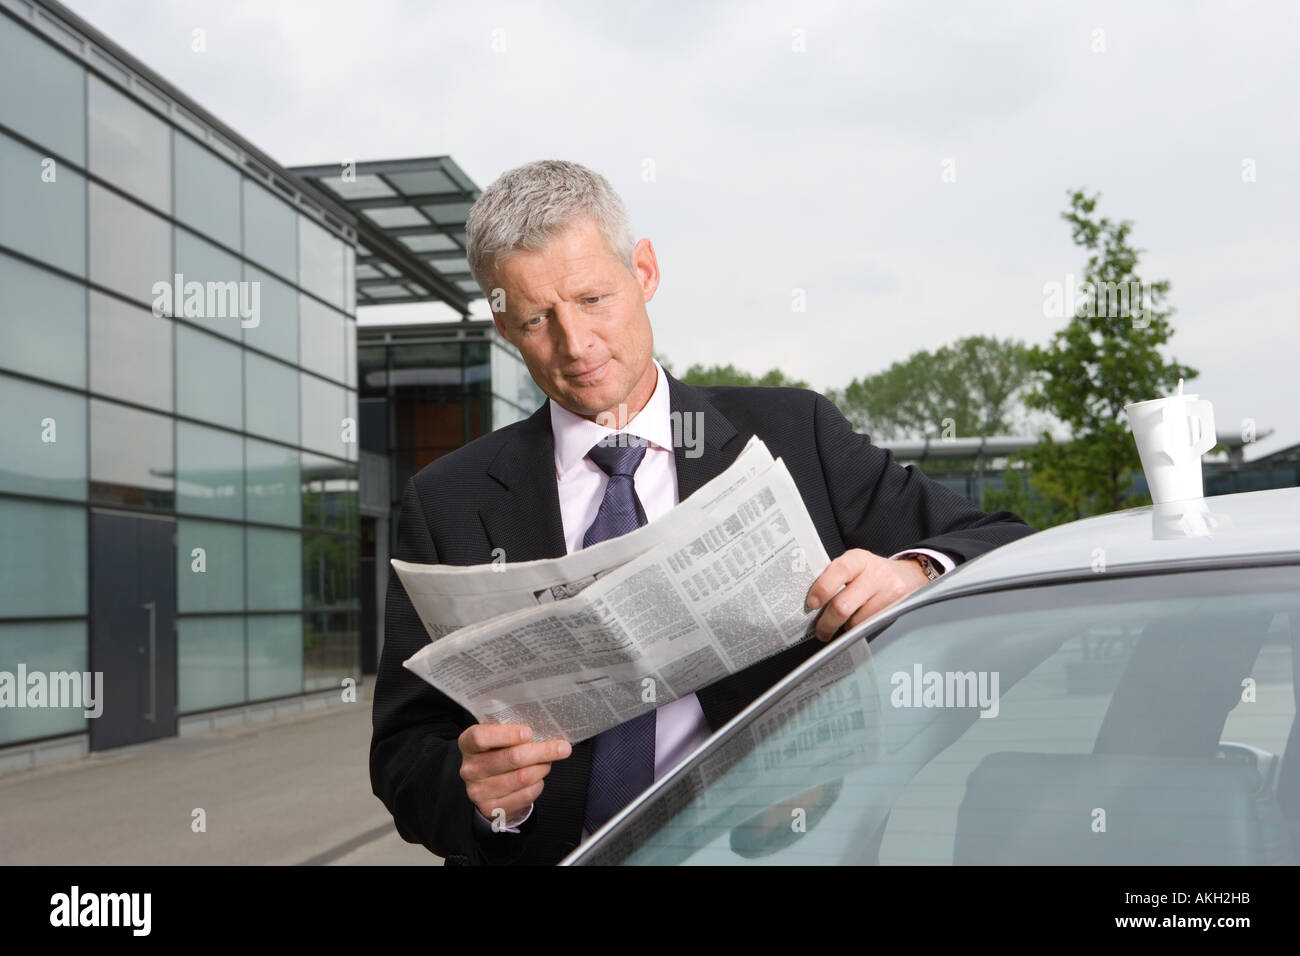 Businessman reading newspaper by car Stock Photo